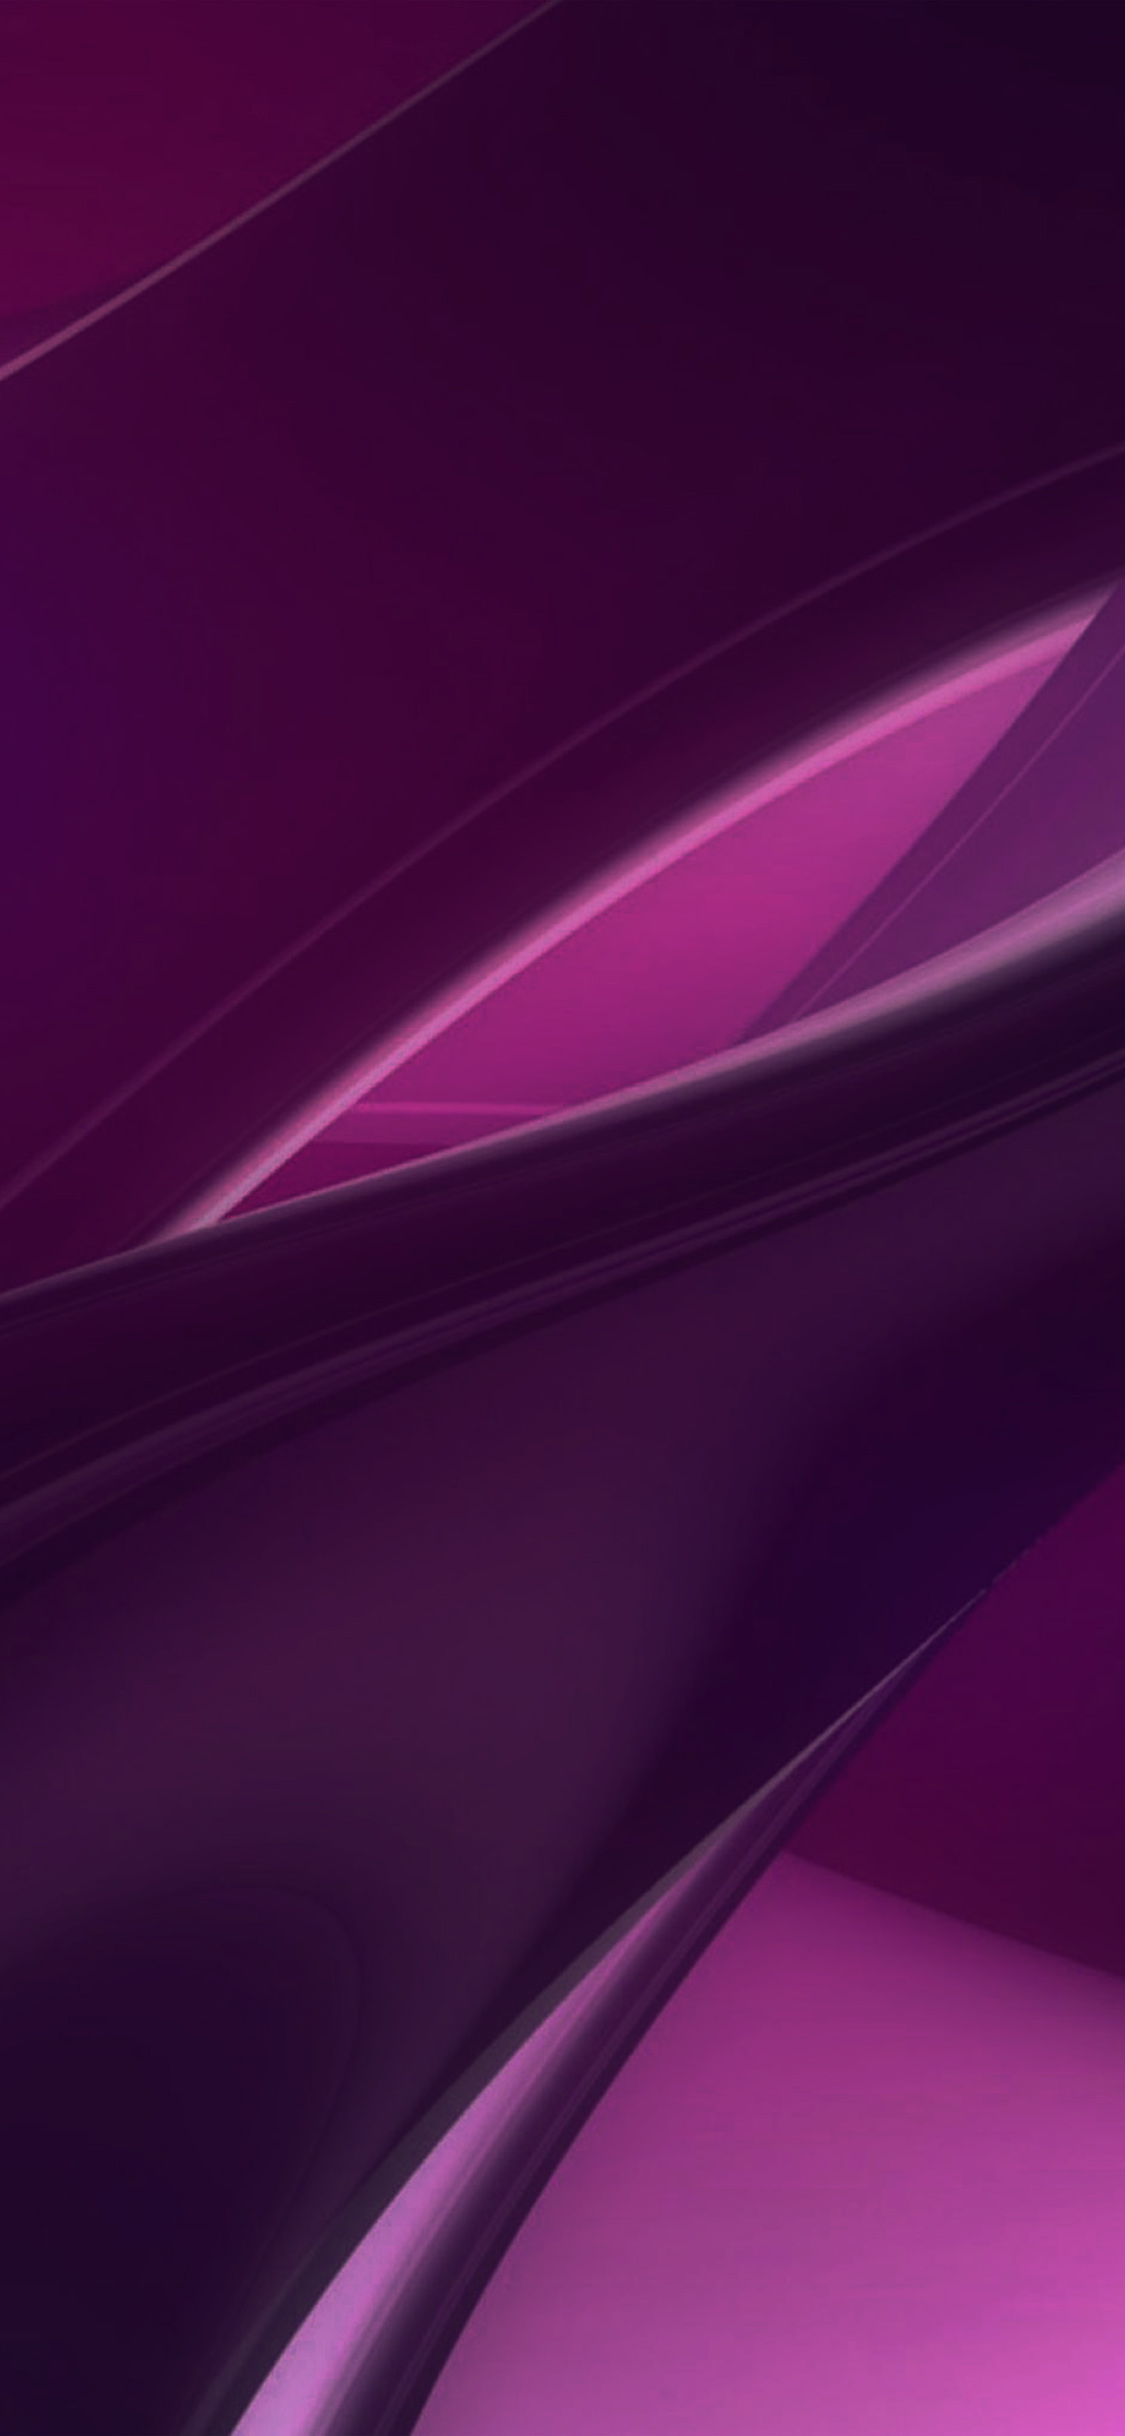 Purple Pink Abstract Curve Wallpaper Iphone - HD Wallpaper 